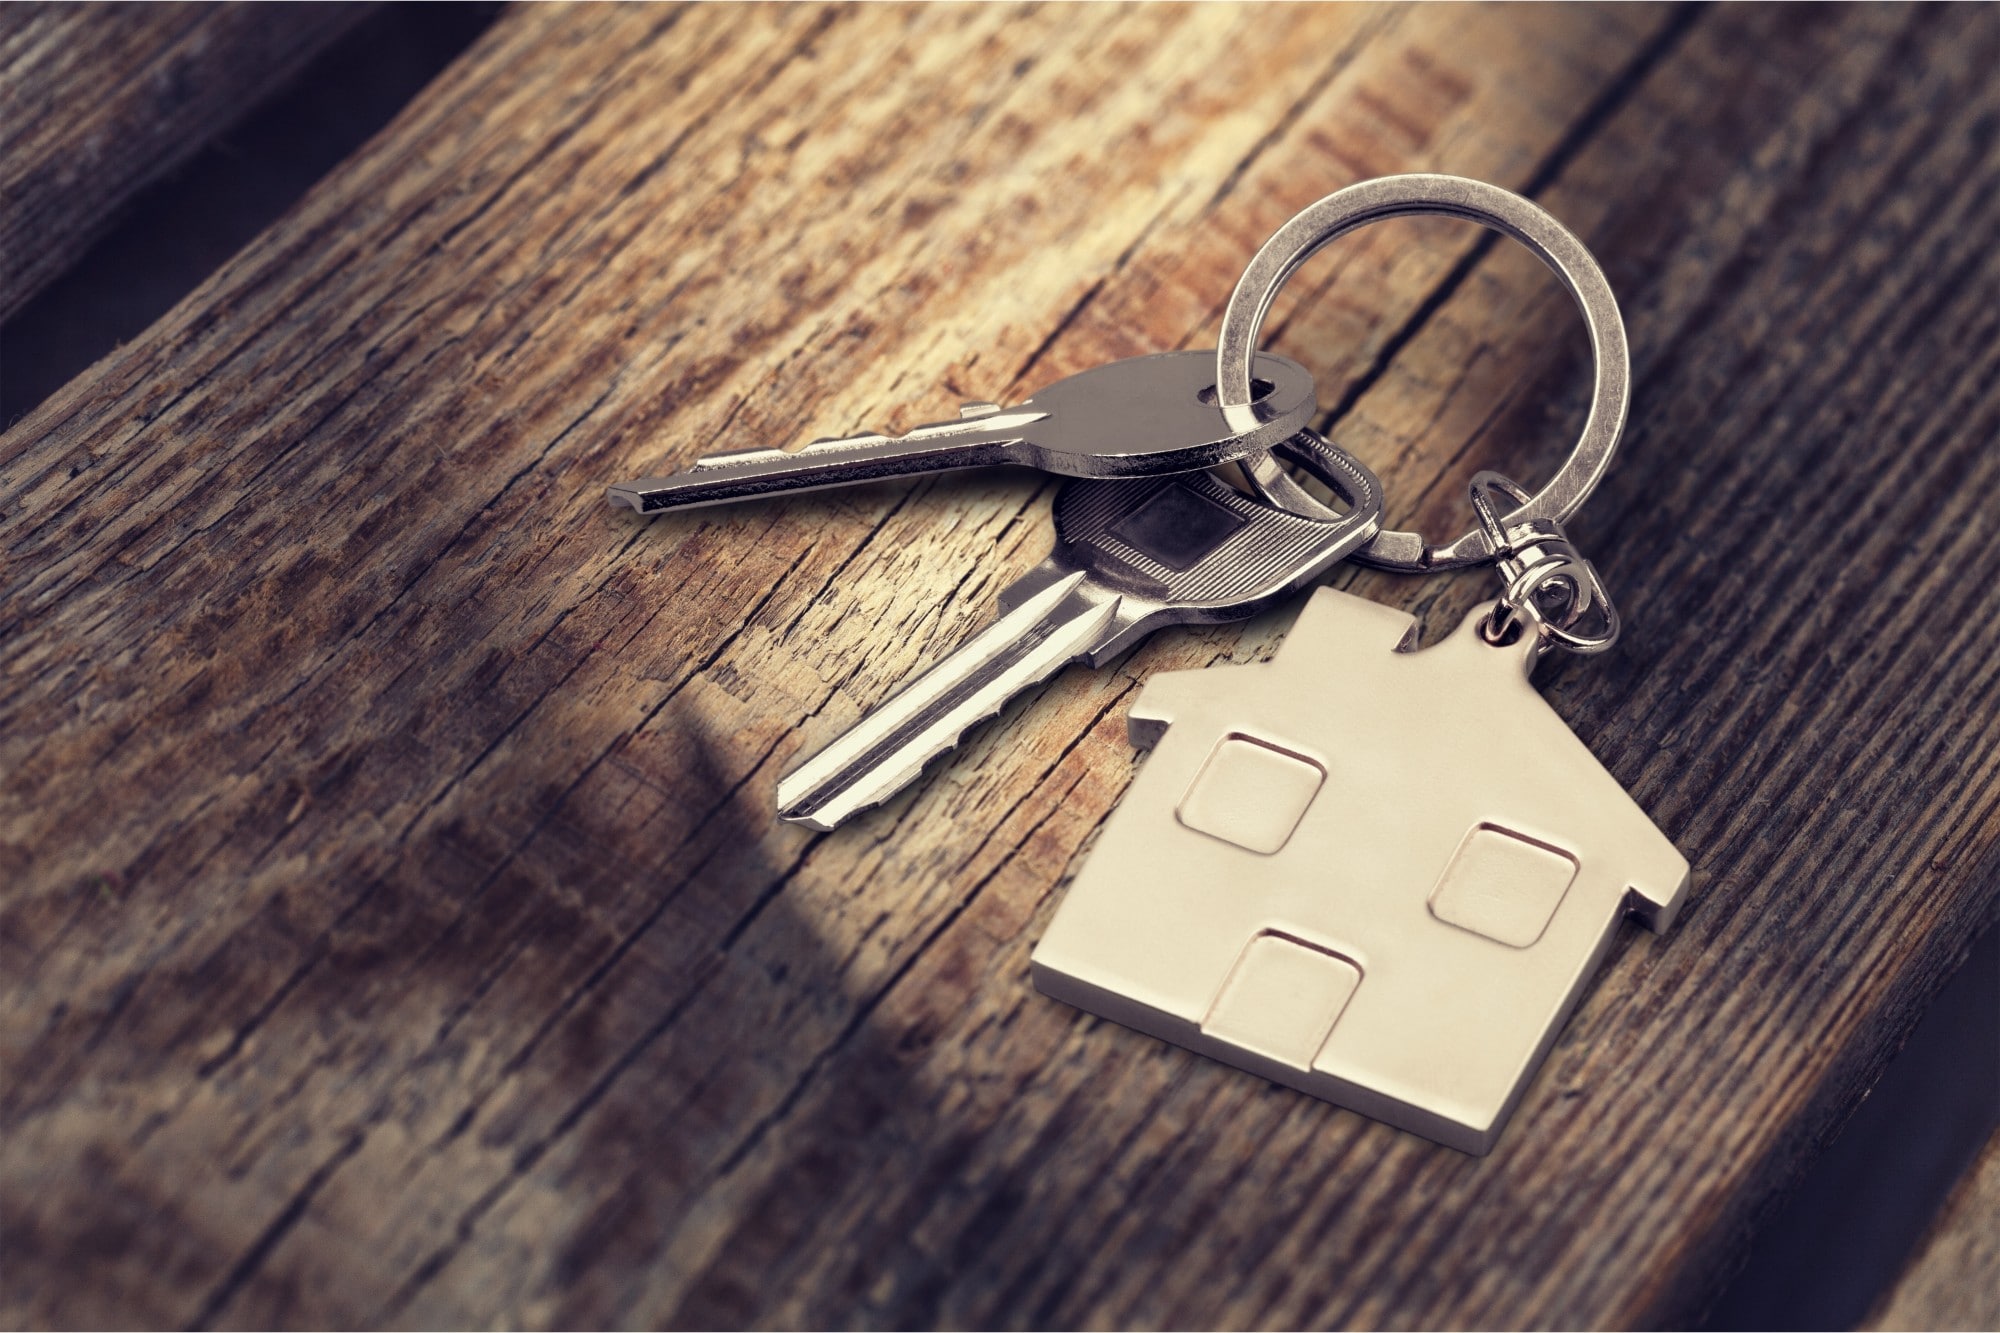 A Landlord’s Guide to Managing Your Tenant’s Security Deposit